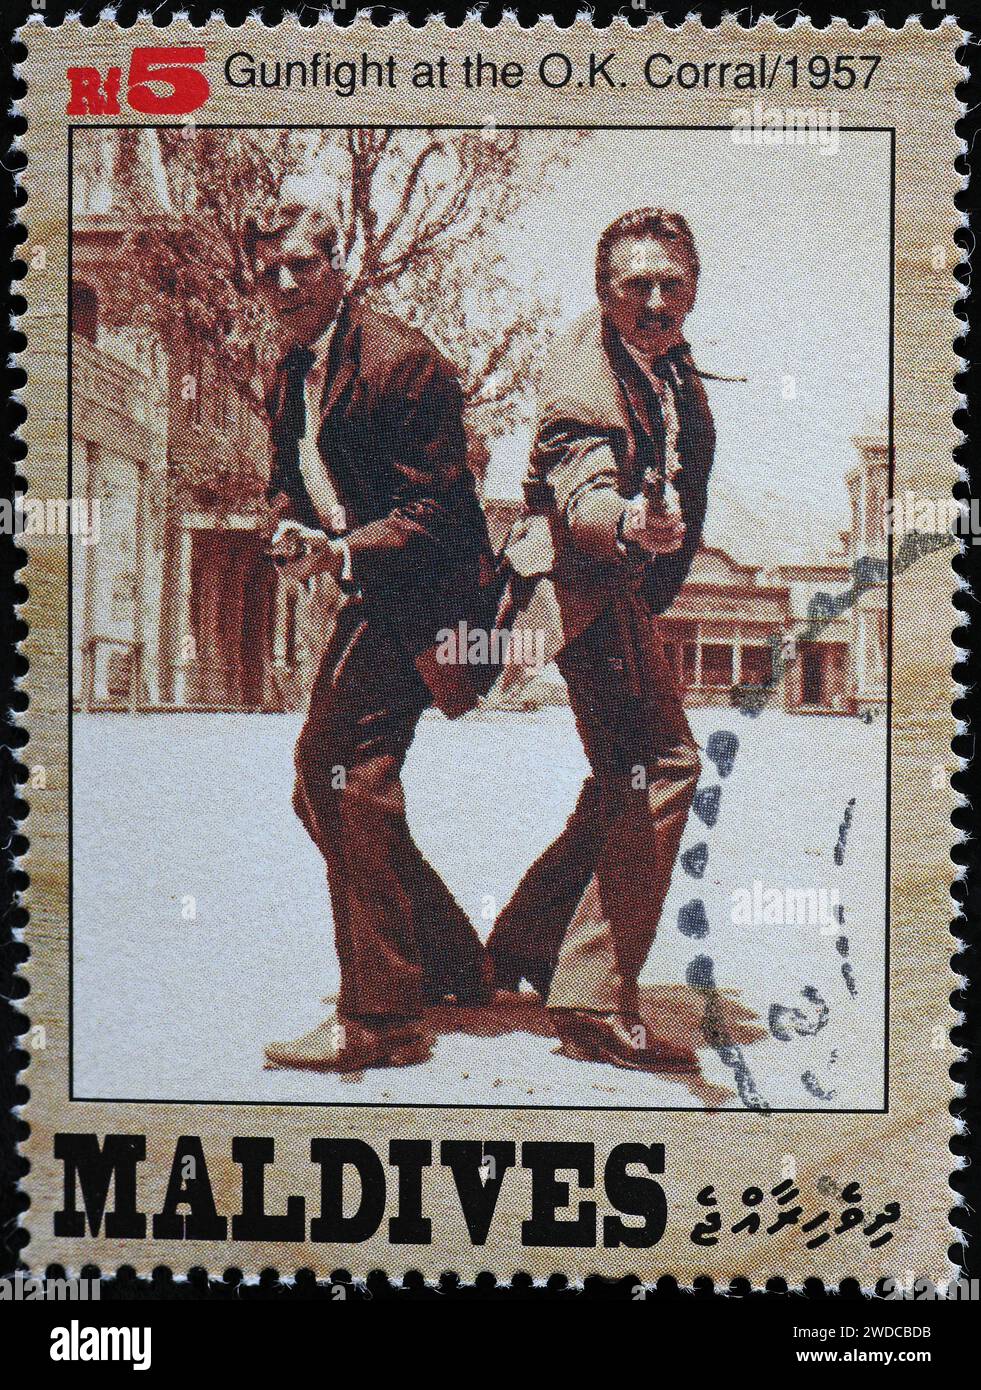 Picture of Burt Lancaster and Kirk Douglas on postage stamp Stock Photo